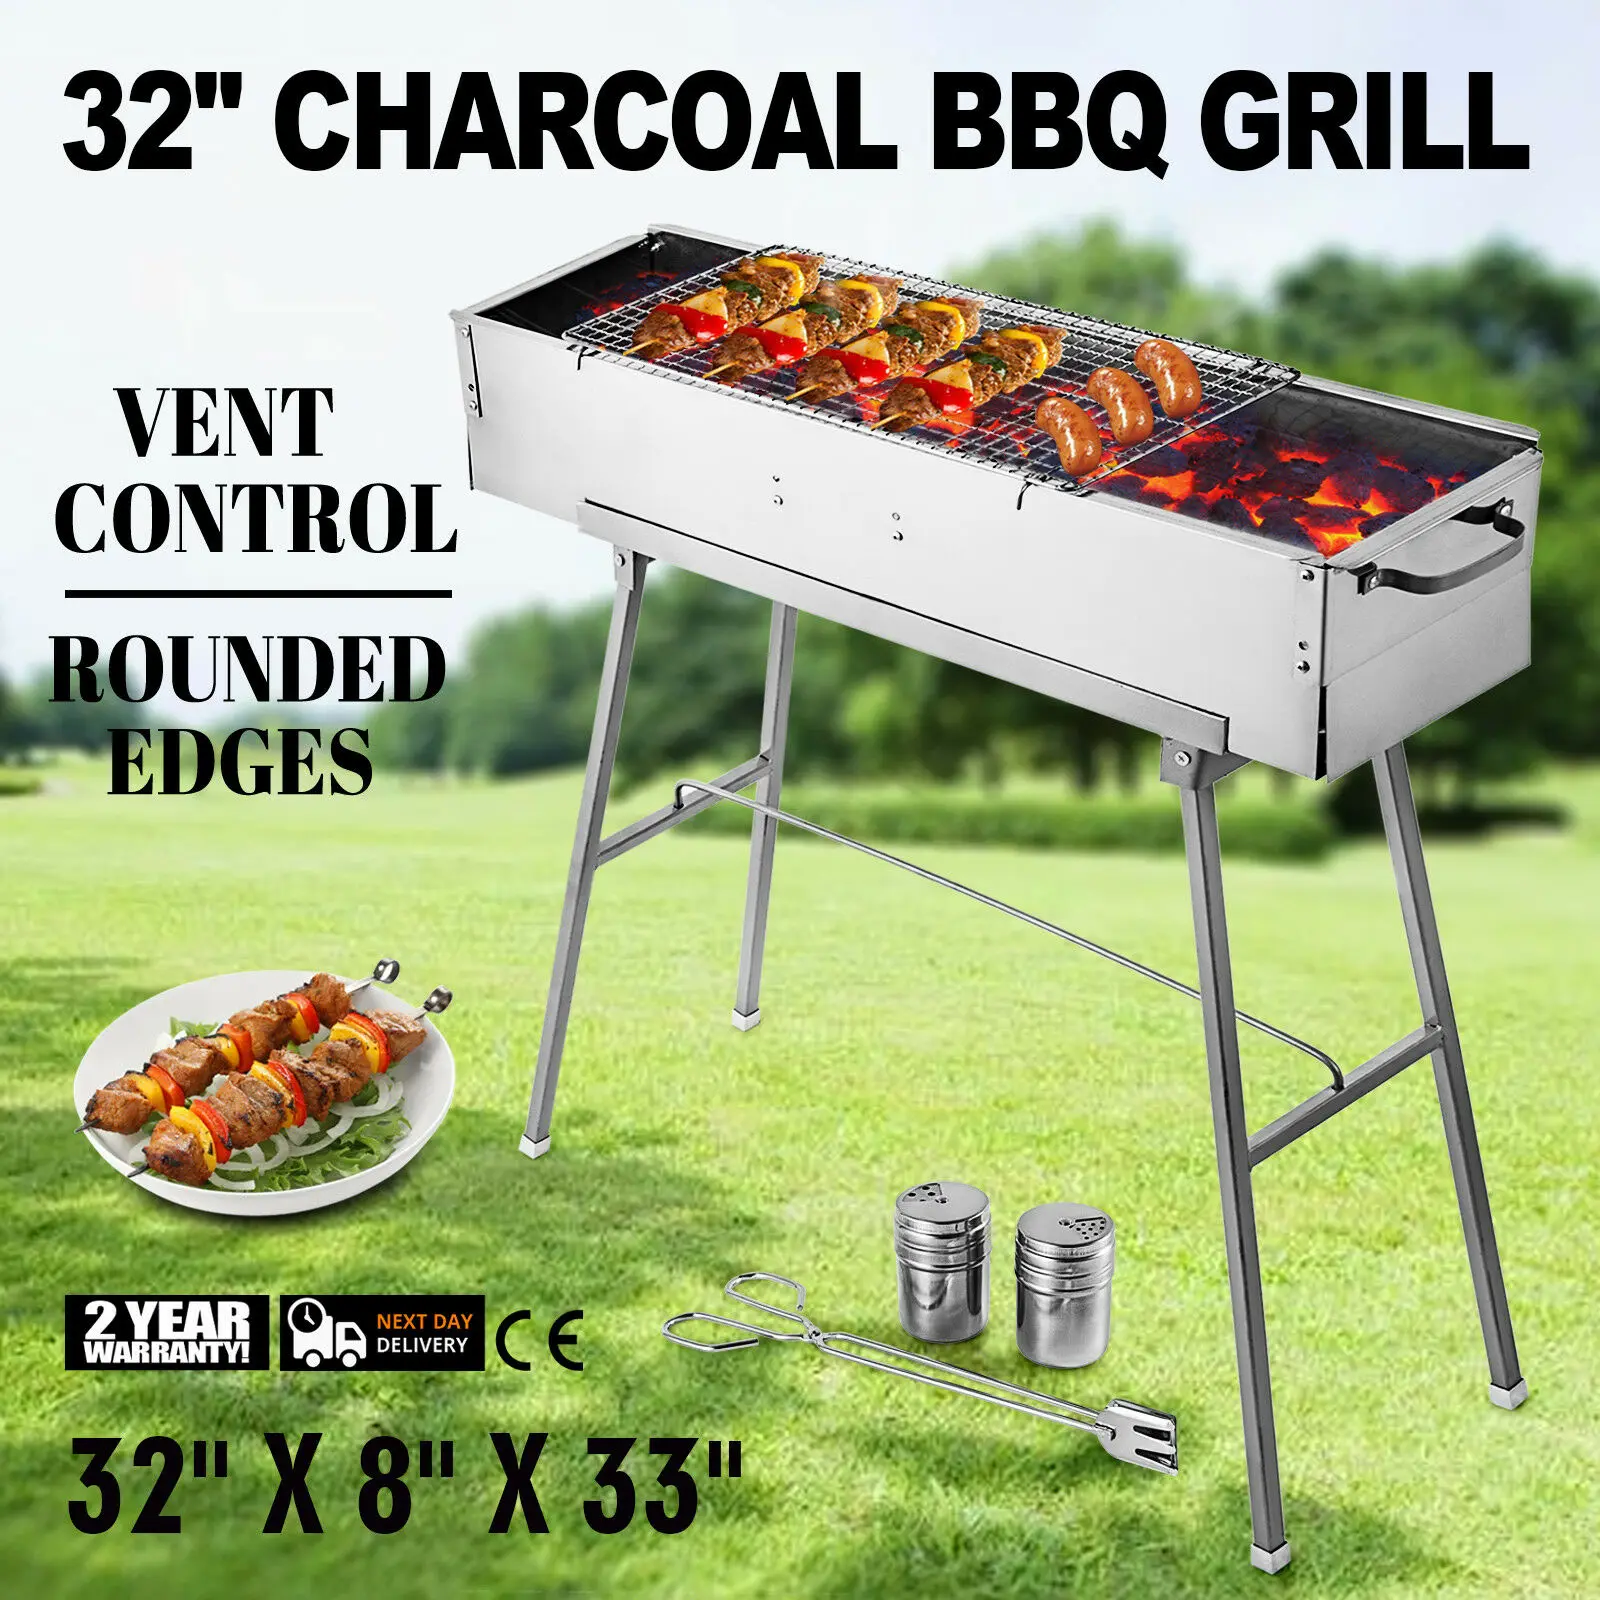 

Party Griller 32 Stainless Steel Charcoal Grill Yakitori BBQ Garden Lamb Kebab korean bbq grill table bbq gas grill